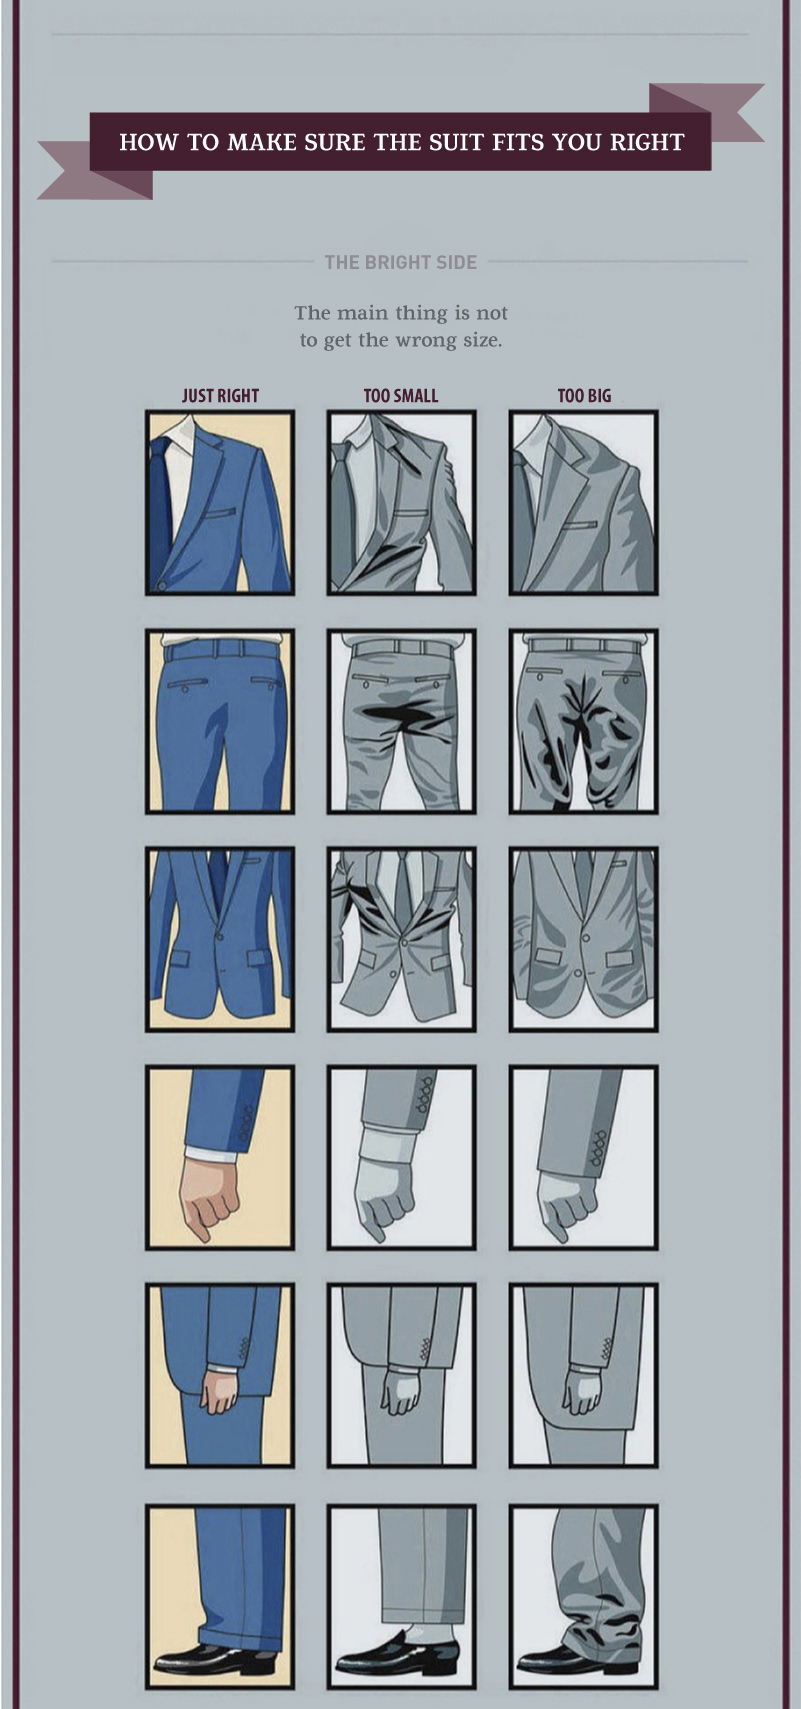 How to Wear a Suit Like a Dapper Gent